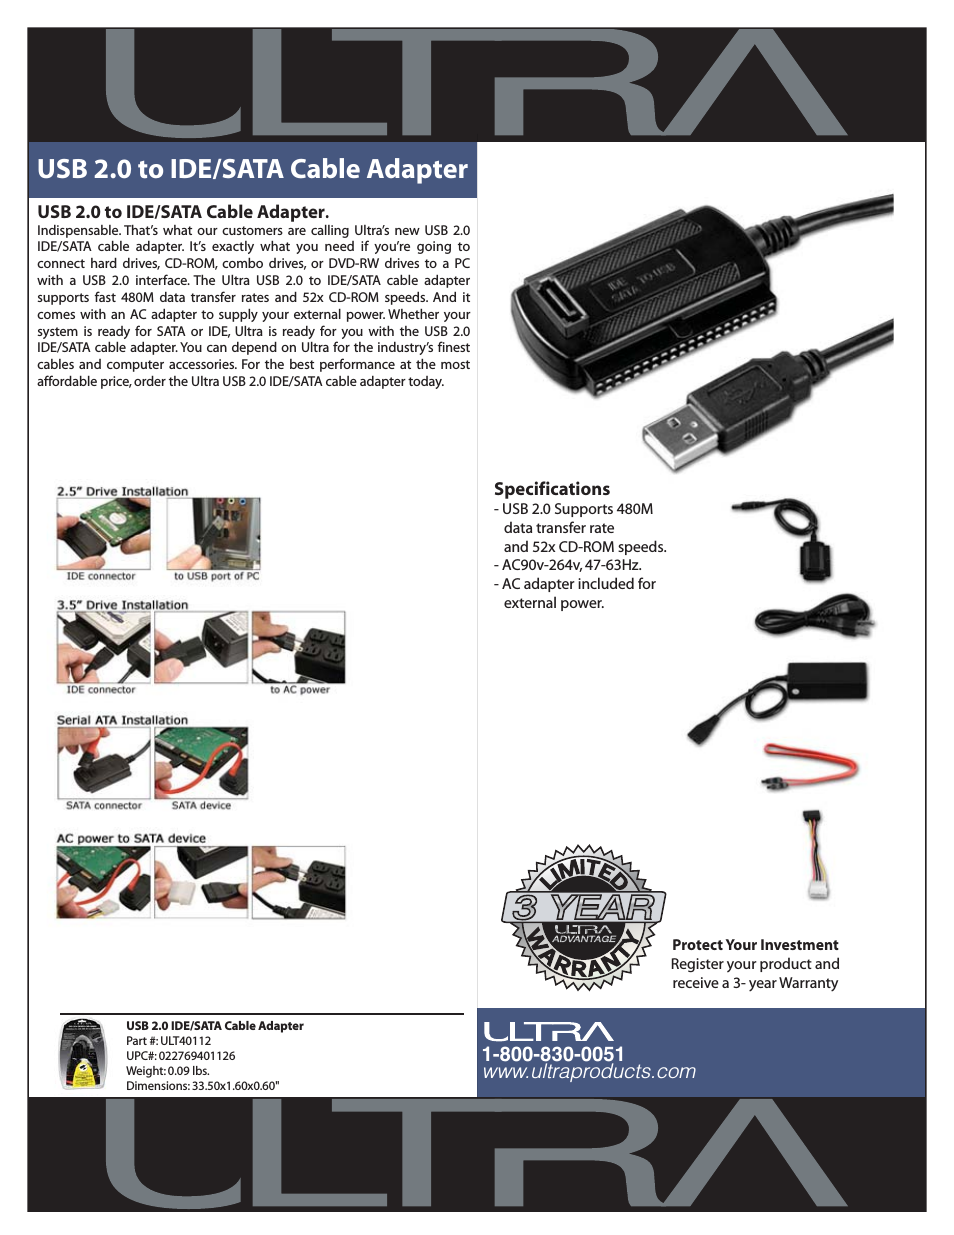 USB 2.0 to IDE/SATA Cable Adapter ULT40112